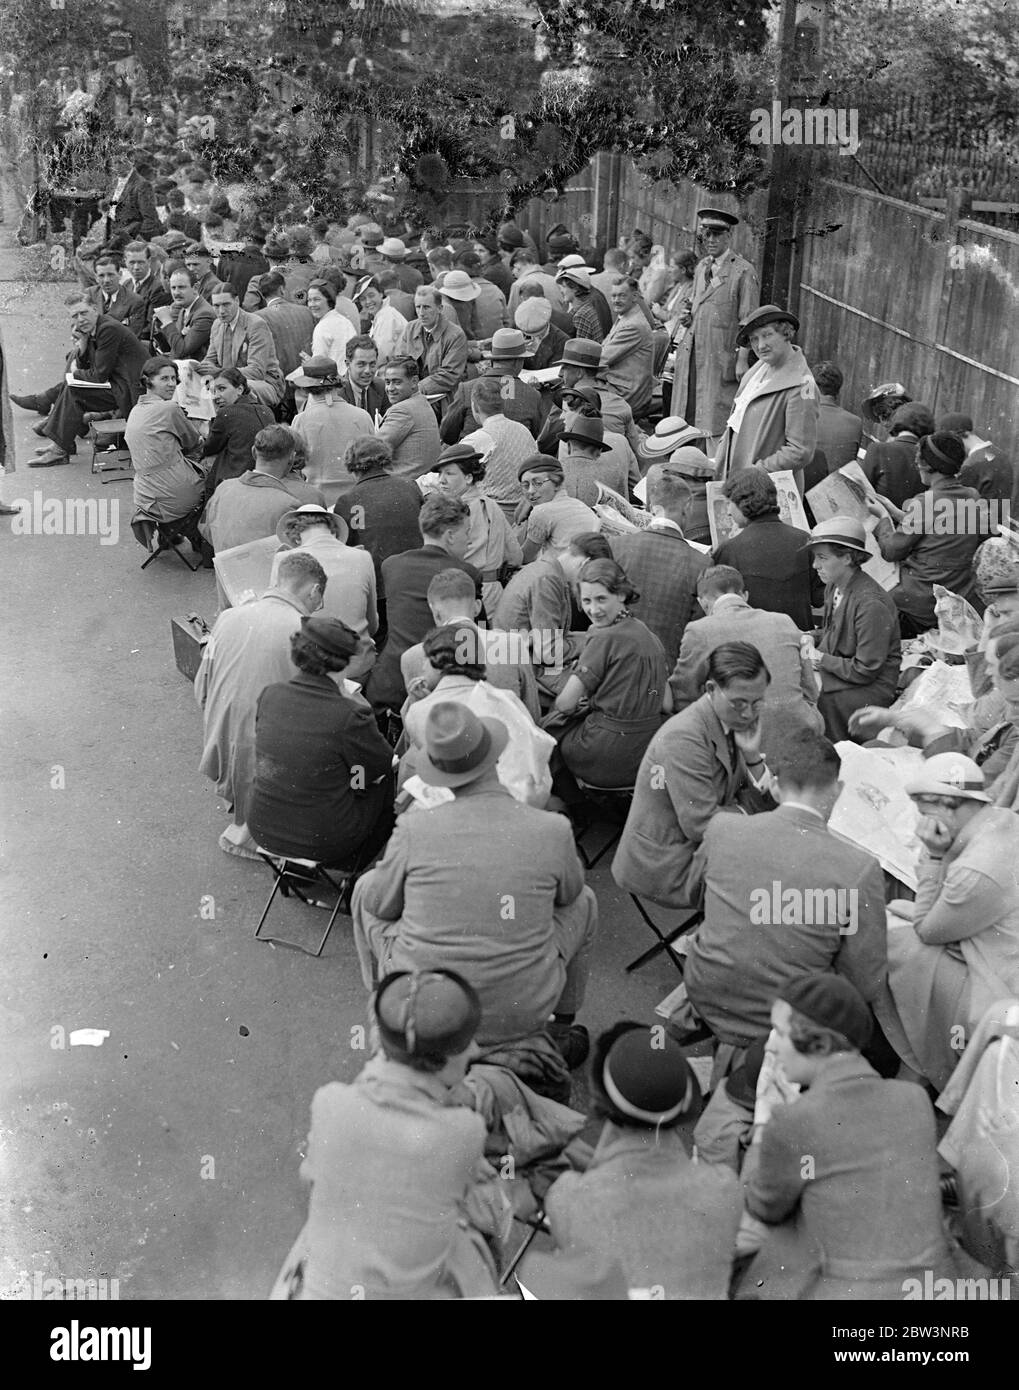 Early Queues For Last Day of Wimbledon . There were big queues at Wimbledon from the early hours for the last day of the tennis championships . Among the titles to be decided is the women ' s singles . Photo Shows : The early crowd at Wimbledon 4 Jul 1936 Stock Photo